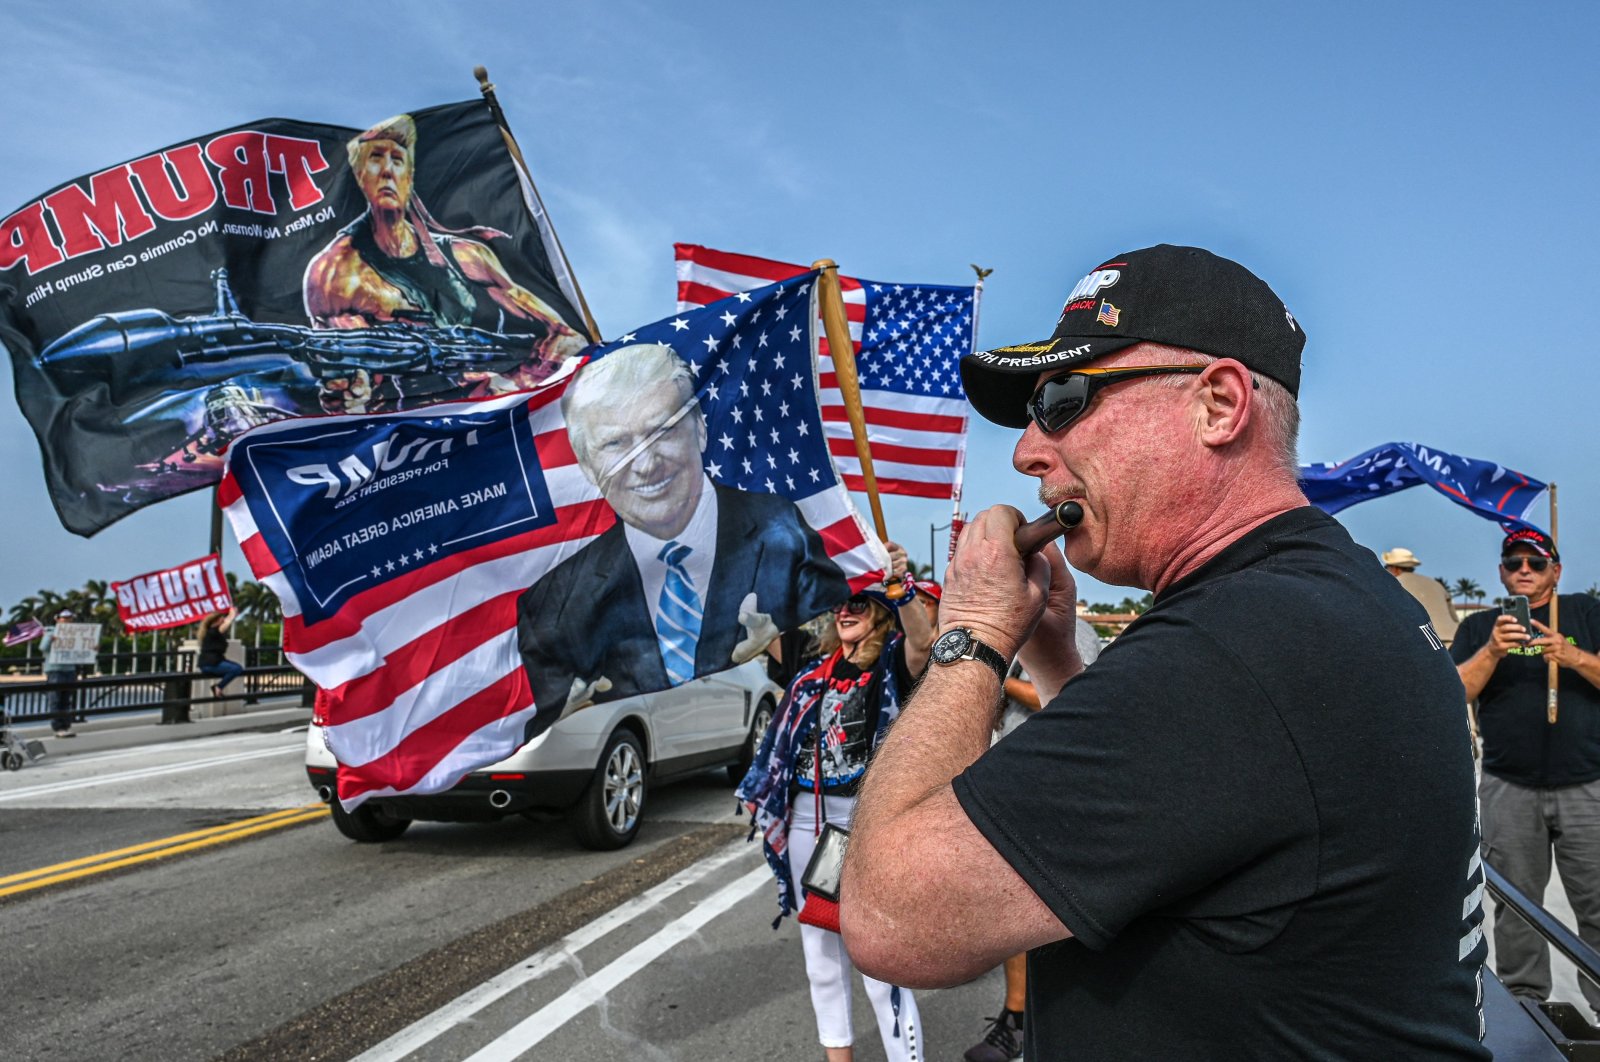 Supporters of former U.S. President Donald Trump gather near his residence at Mar-A-Lago in Palm Beach, Florida, U.S., Aug. 9, 2022. (AFP Photo)